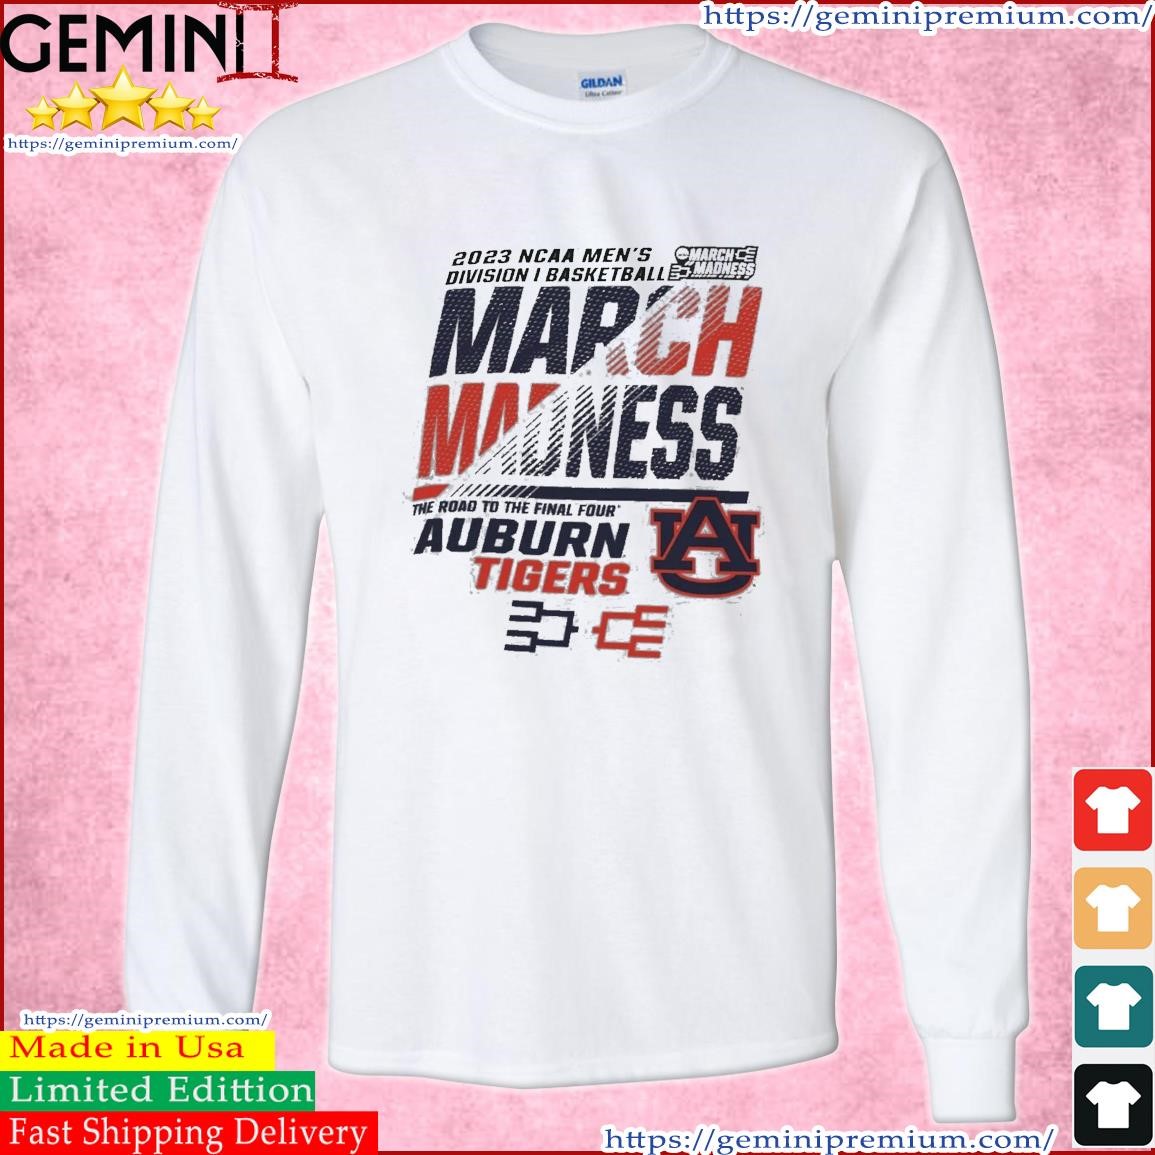 Auburn Tigers Men's Basketball 2023 NCAA March Madness The Road To Final Four Shirt Long Sleeve Tee.jpg